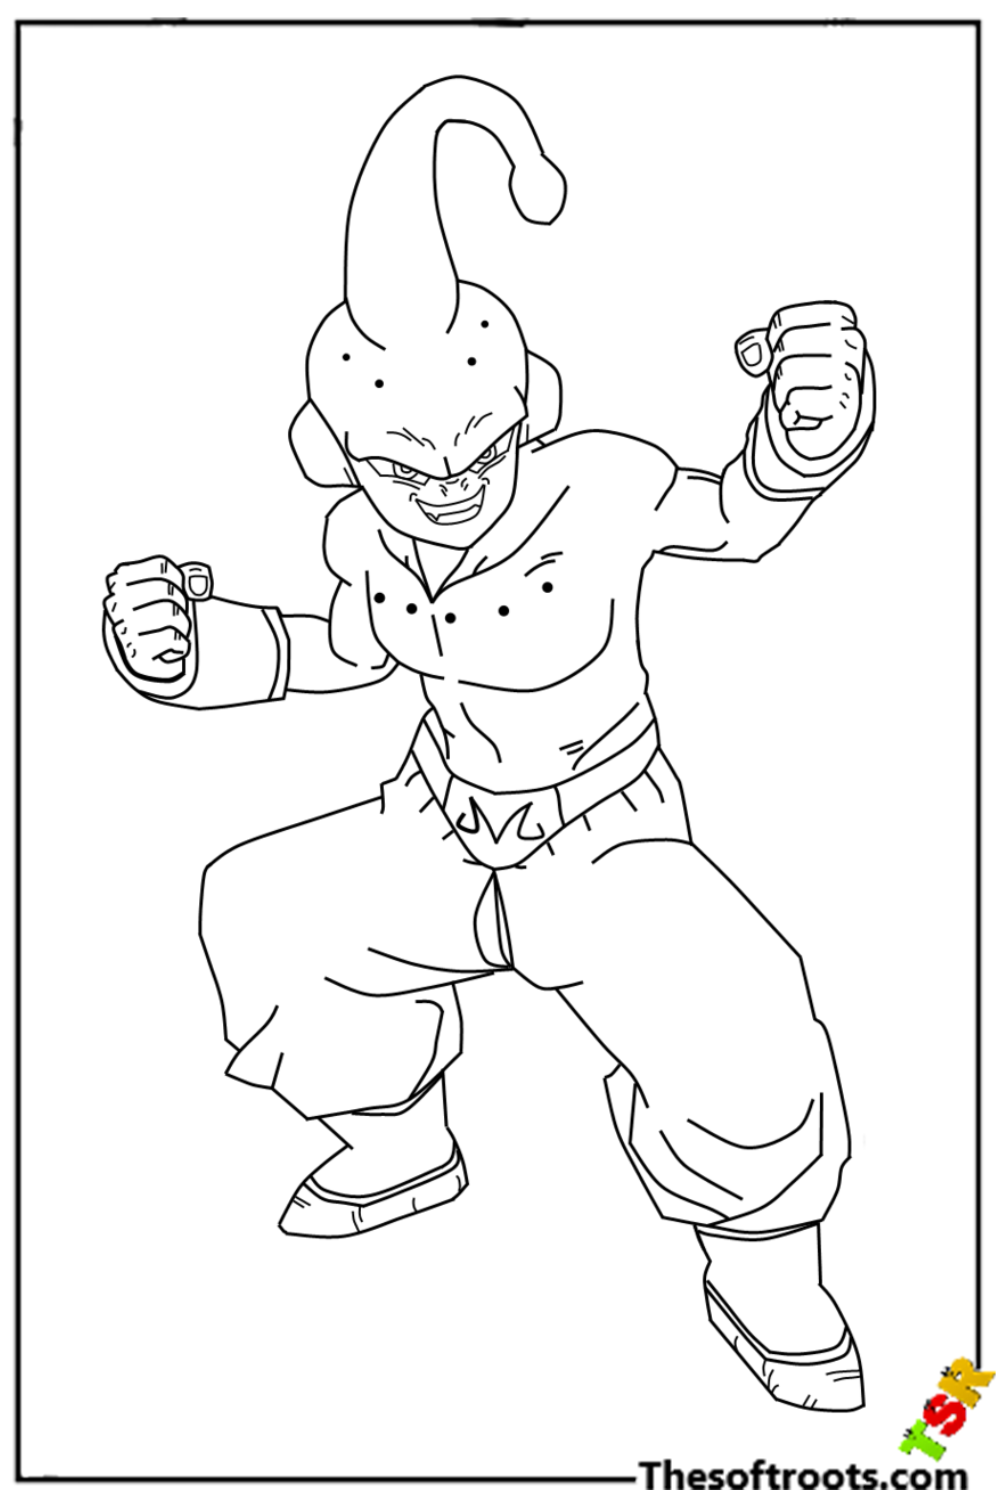 Majin Buu Coloring Pages For Kids | by Kids Drawing Ideas | Medium